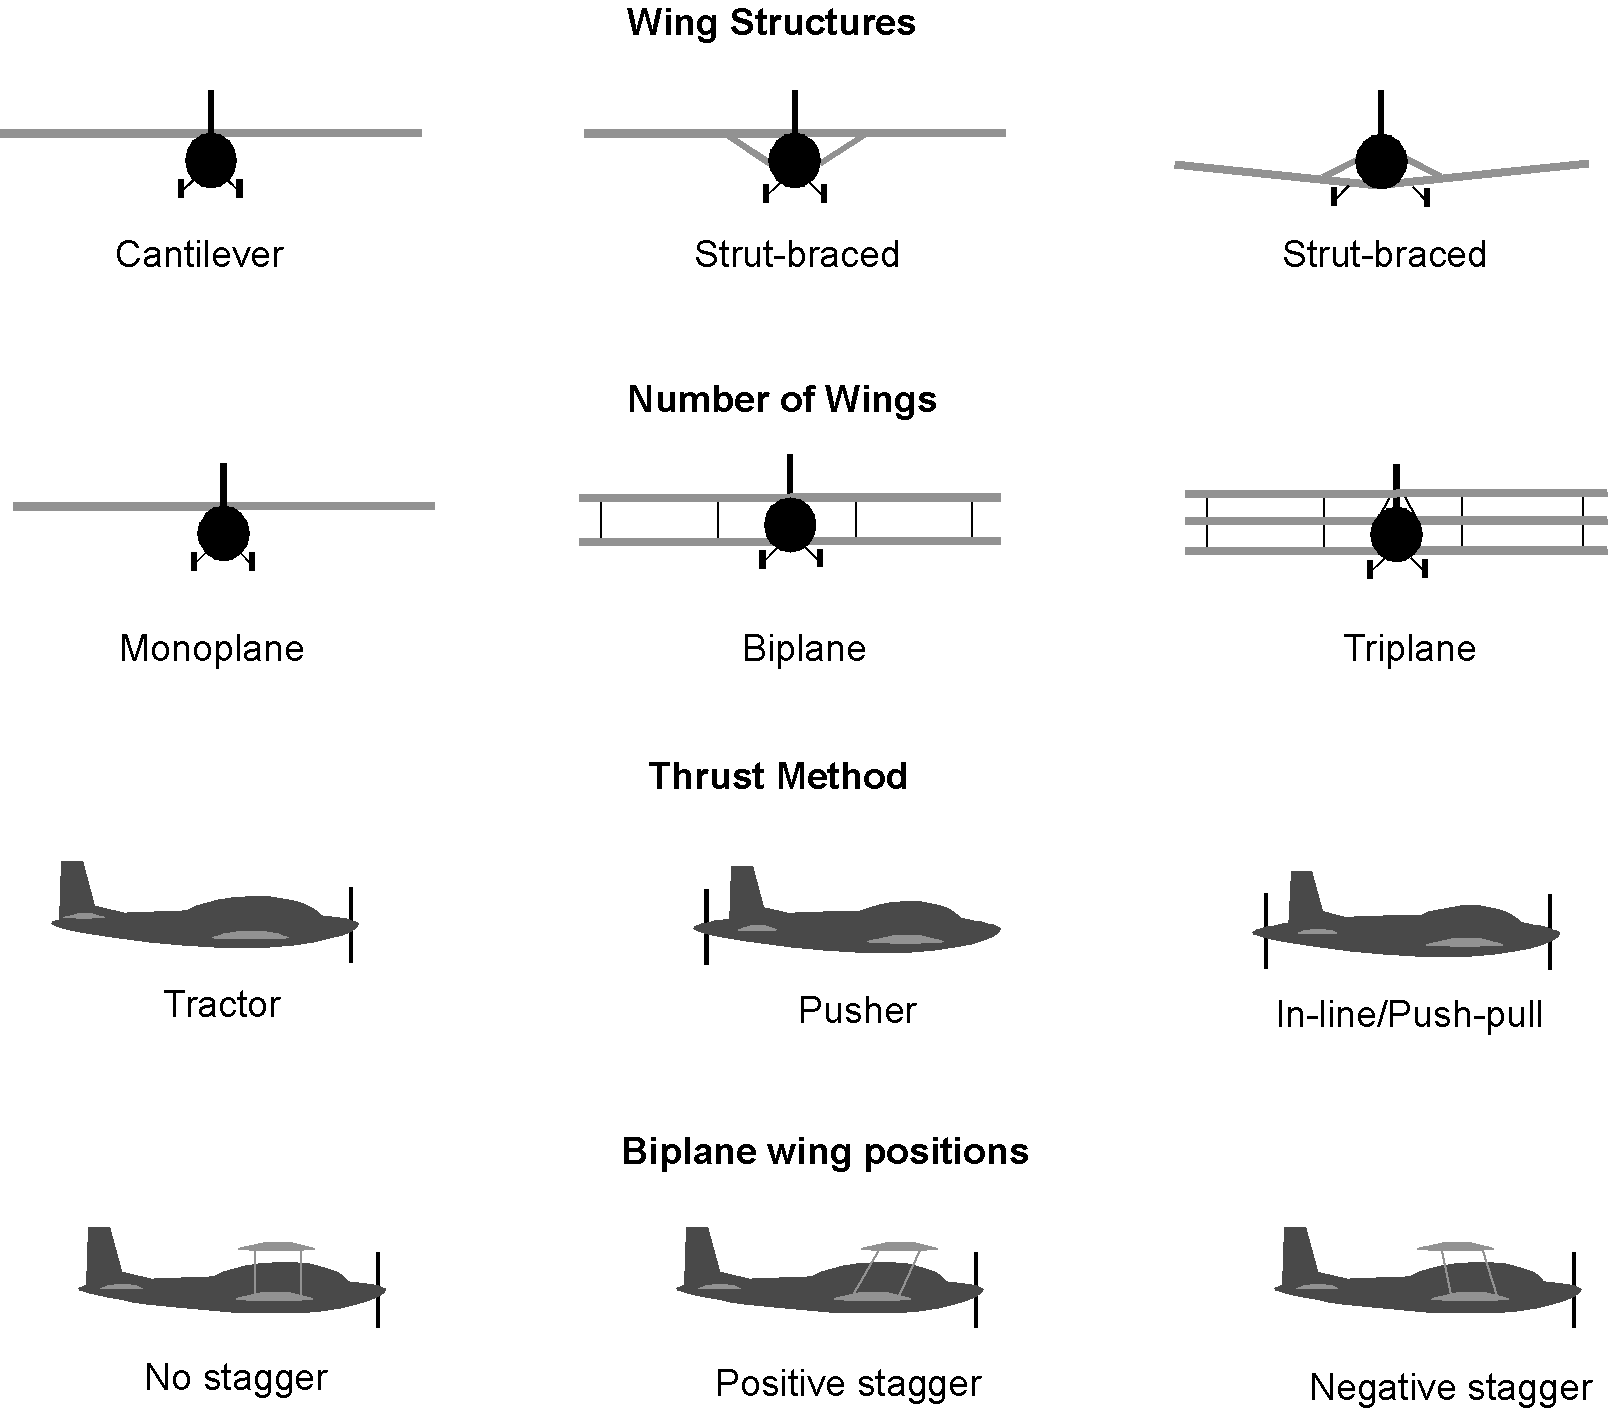 Black and gray diagram showing different wing structures, number, thrust methods, and biplane wing positions possible.